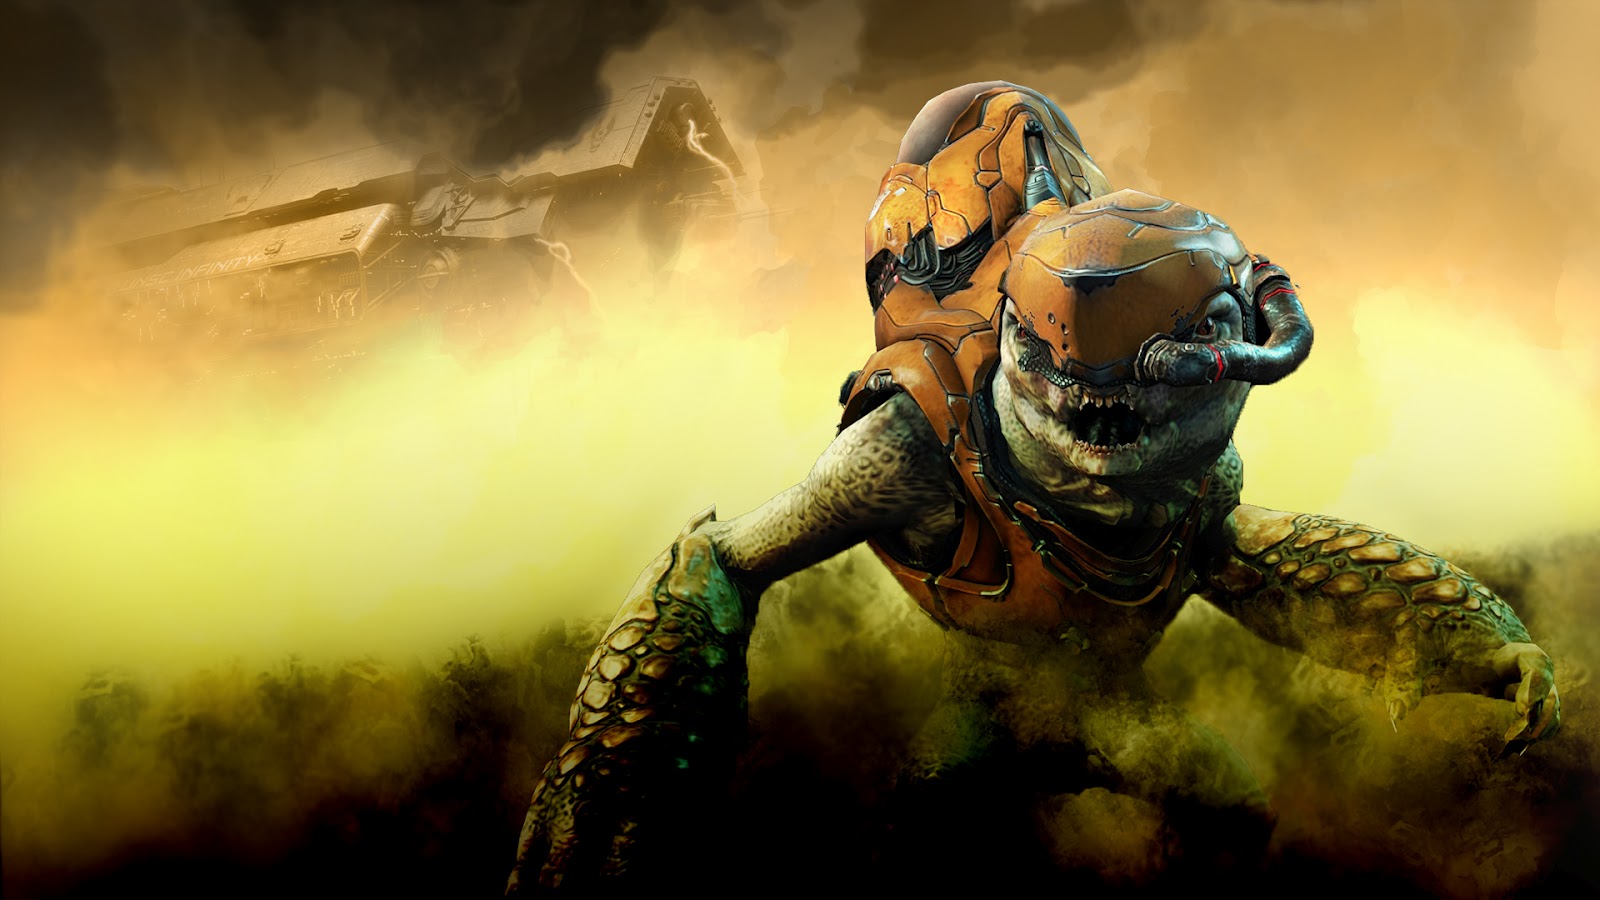 Halo 4 Wallpaper Collection (36+)